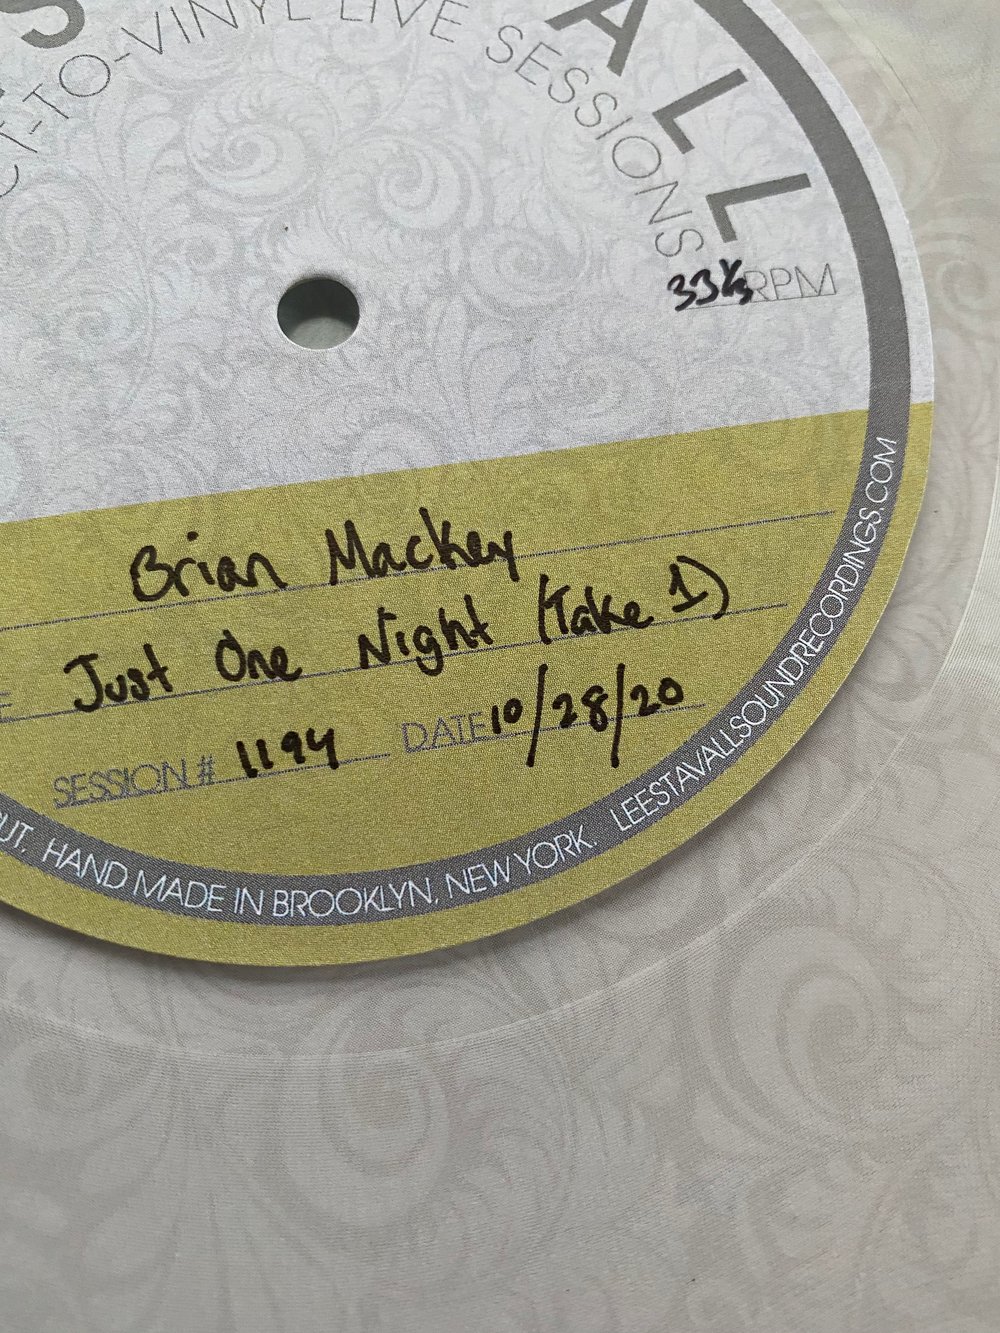 One of a Kind - Direct to Vinyl - Brian Mackey "Just One Night"